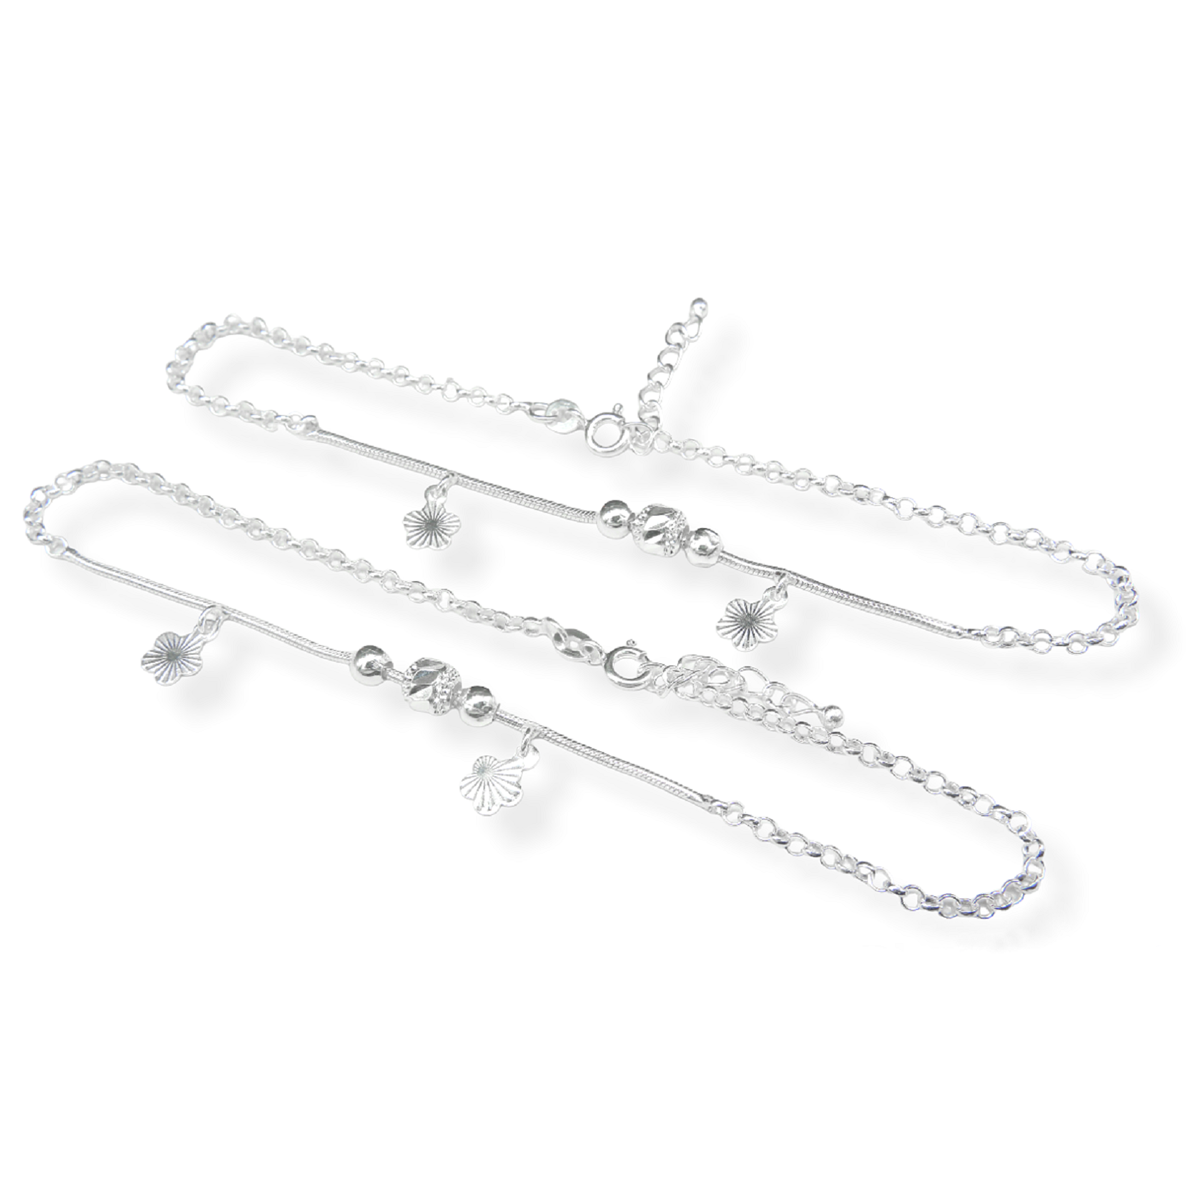 Flower And Ball Design Silver Anklet (Pair)